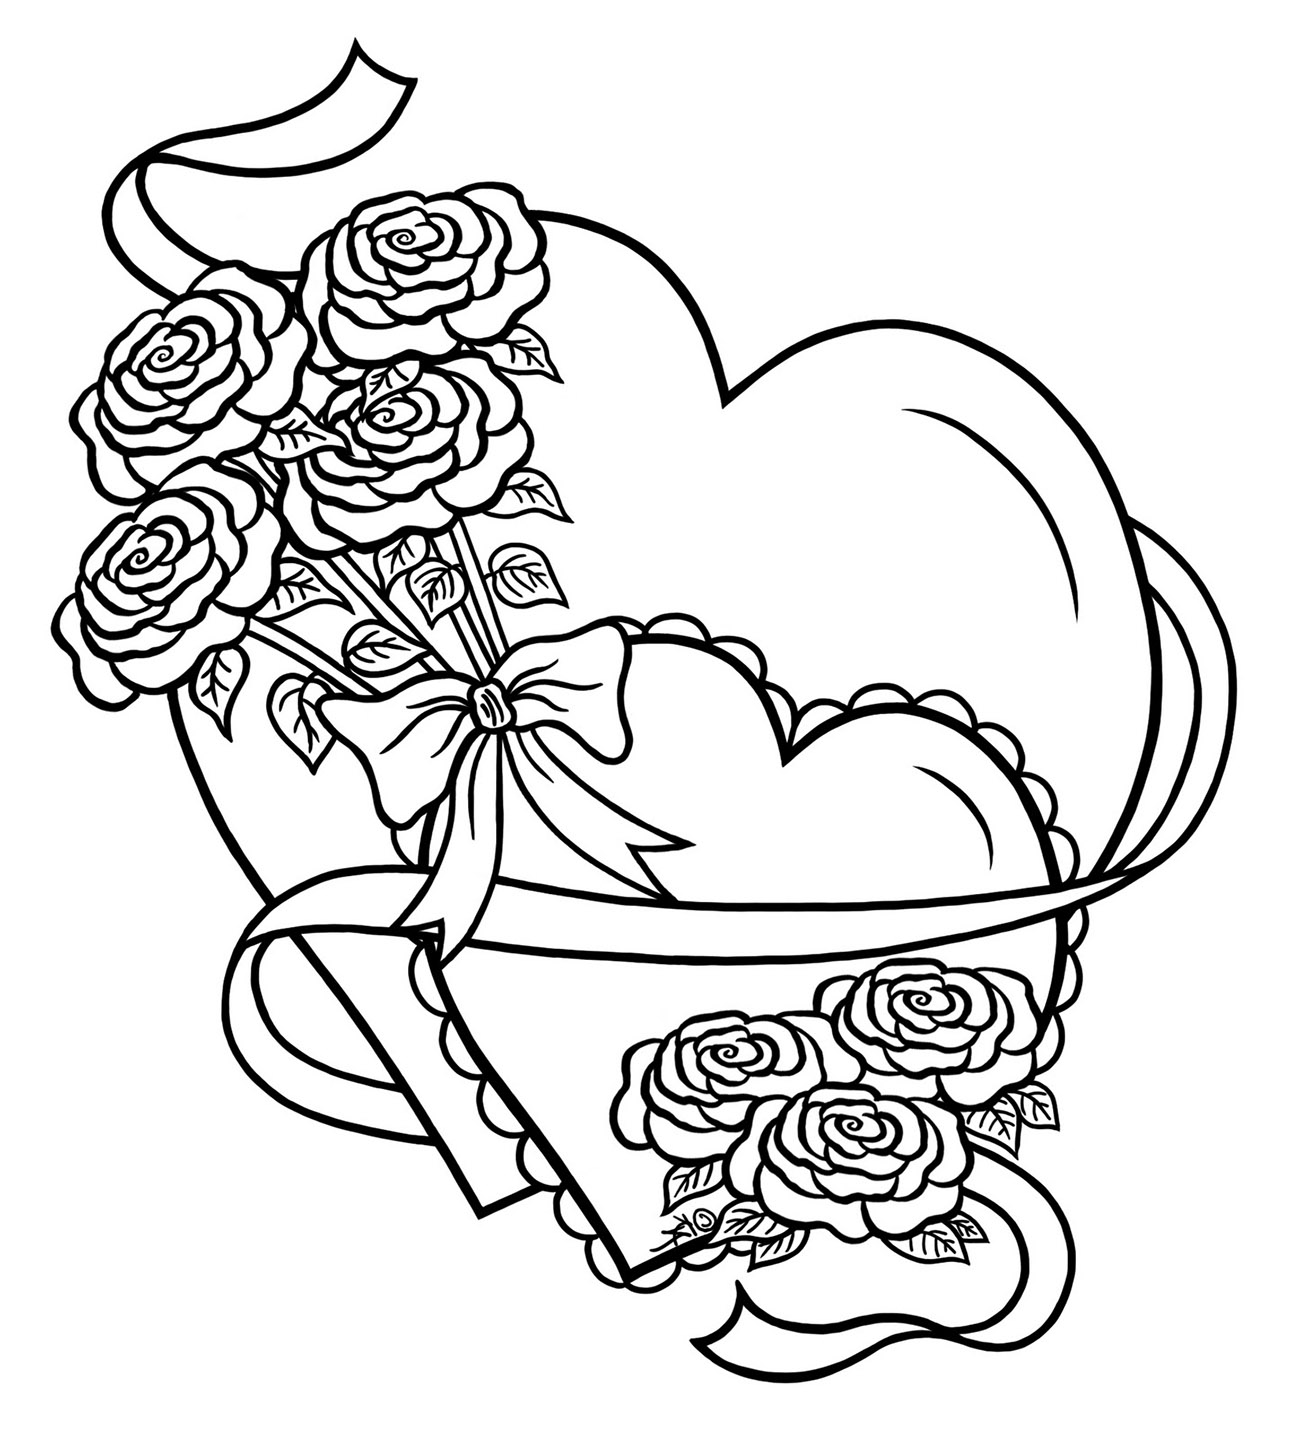 Download Love simple heart with flowers - Anti stress Adult Coloring Pages